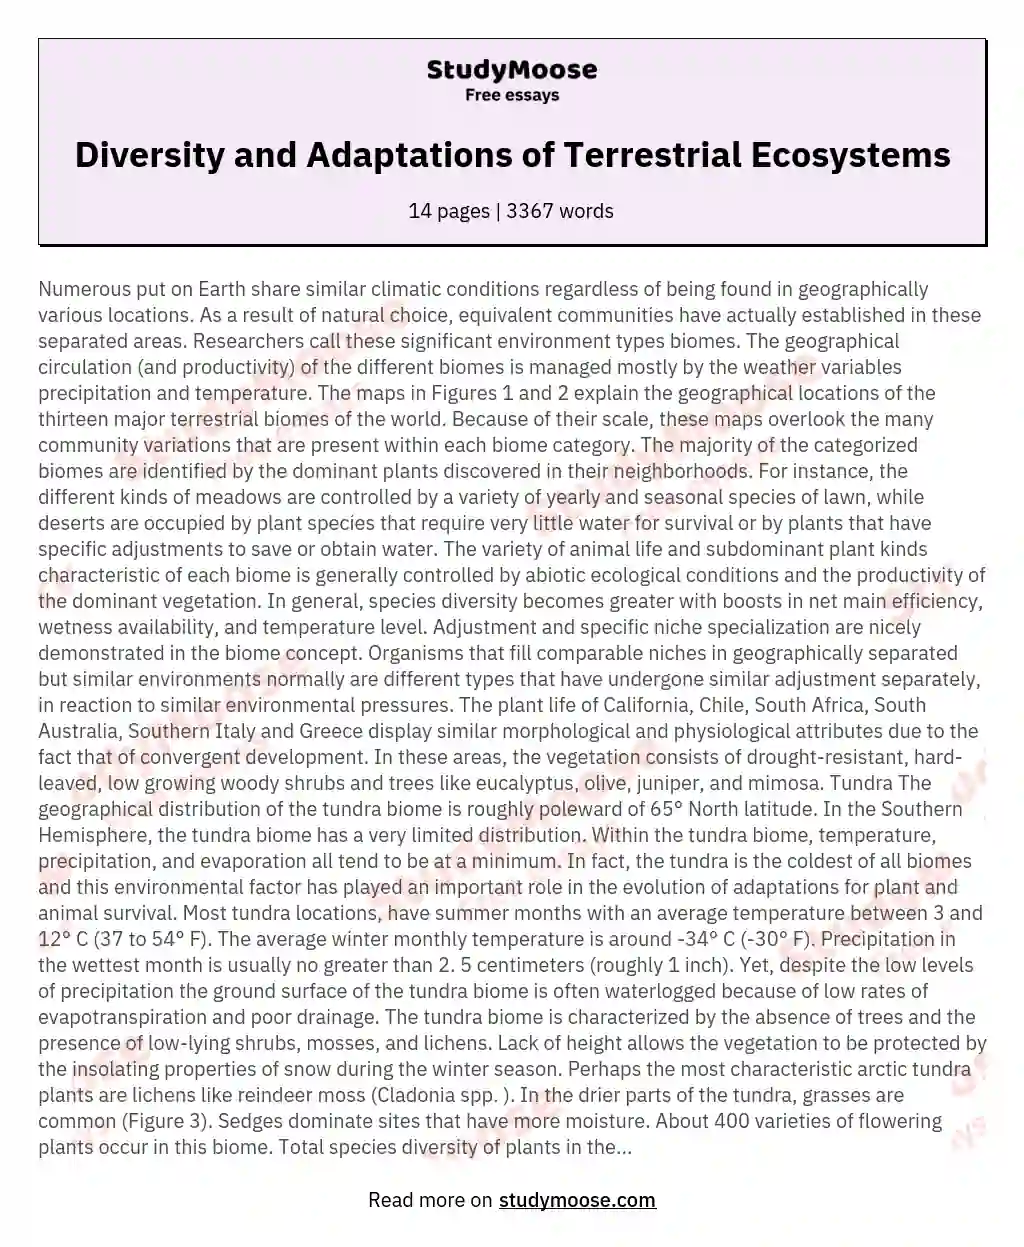 Diversity and Adaptations of Terrestrial Ecosystems essay